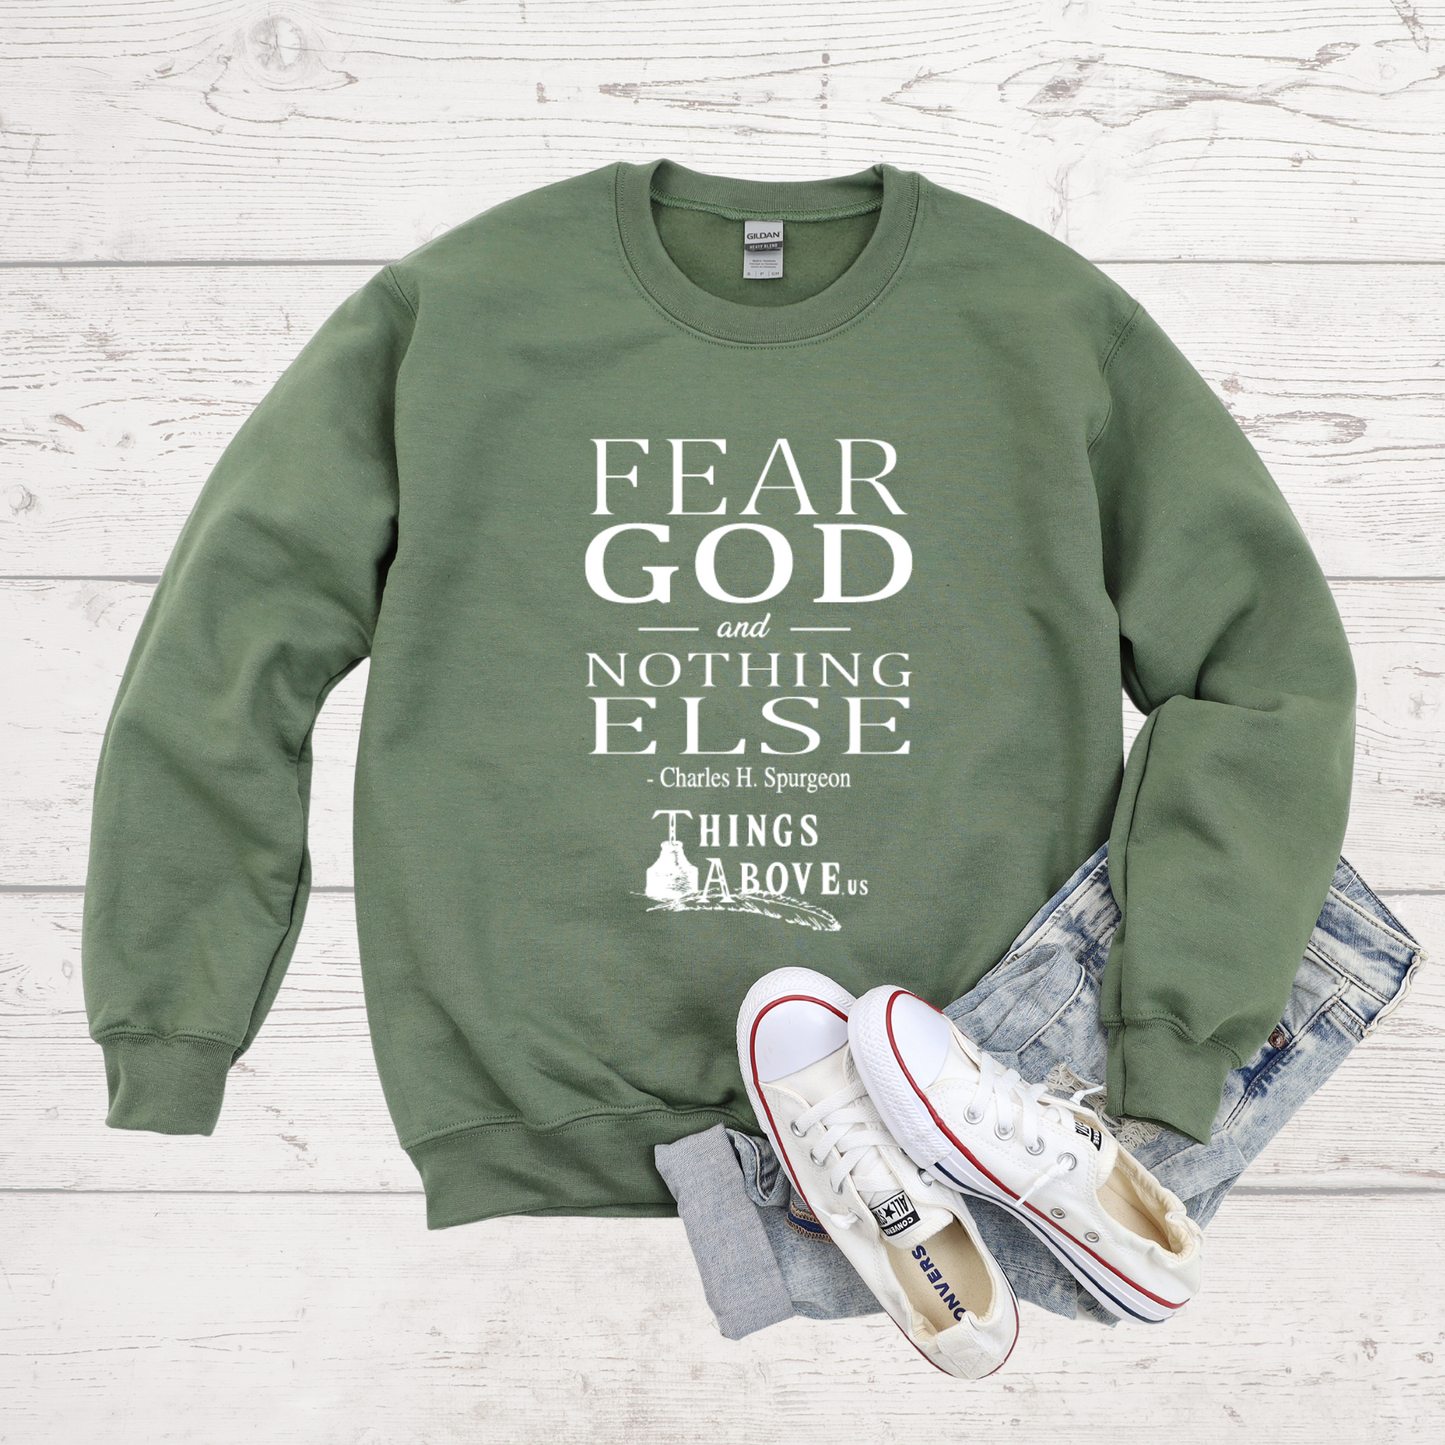 Fear God And Nothing Else Sweatshirt - Things Above.us